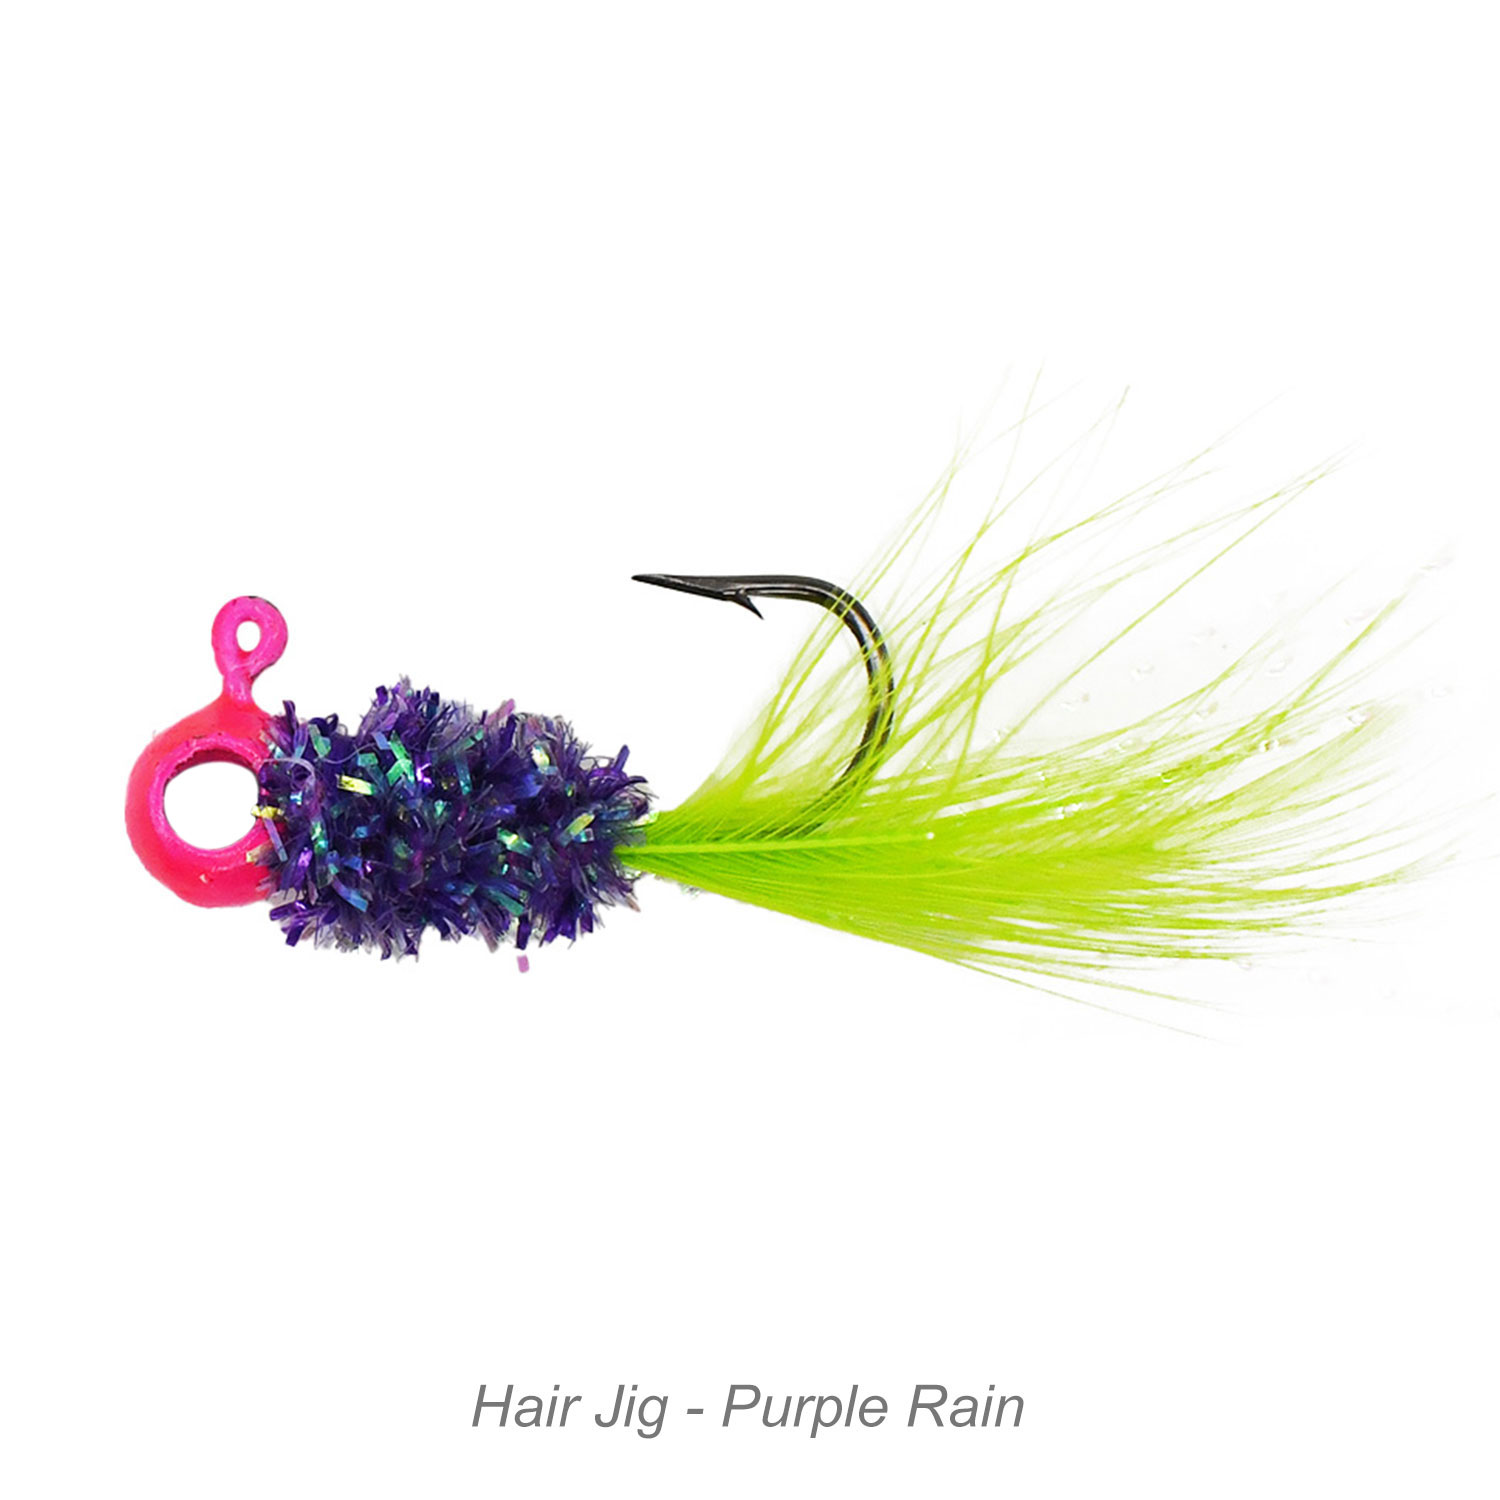 Have you tried the Crappie Magnet Pop-Eye Jigs? These work great